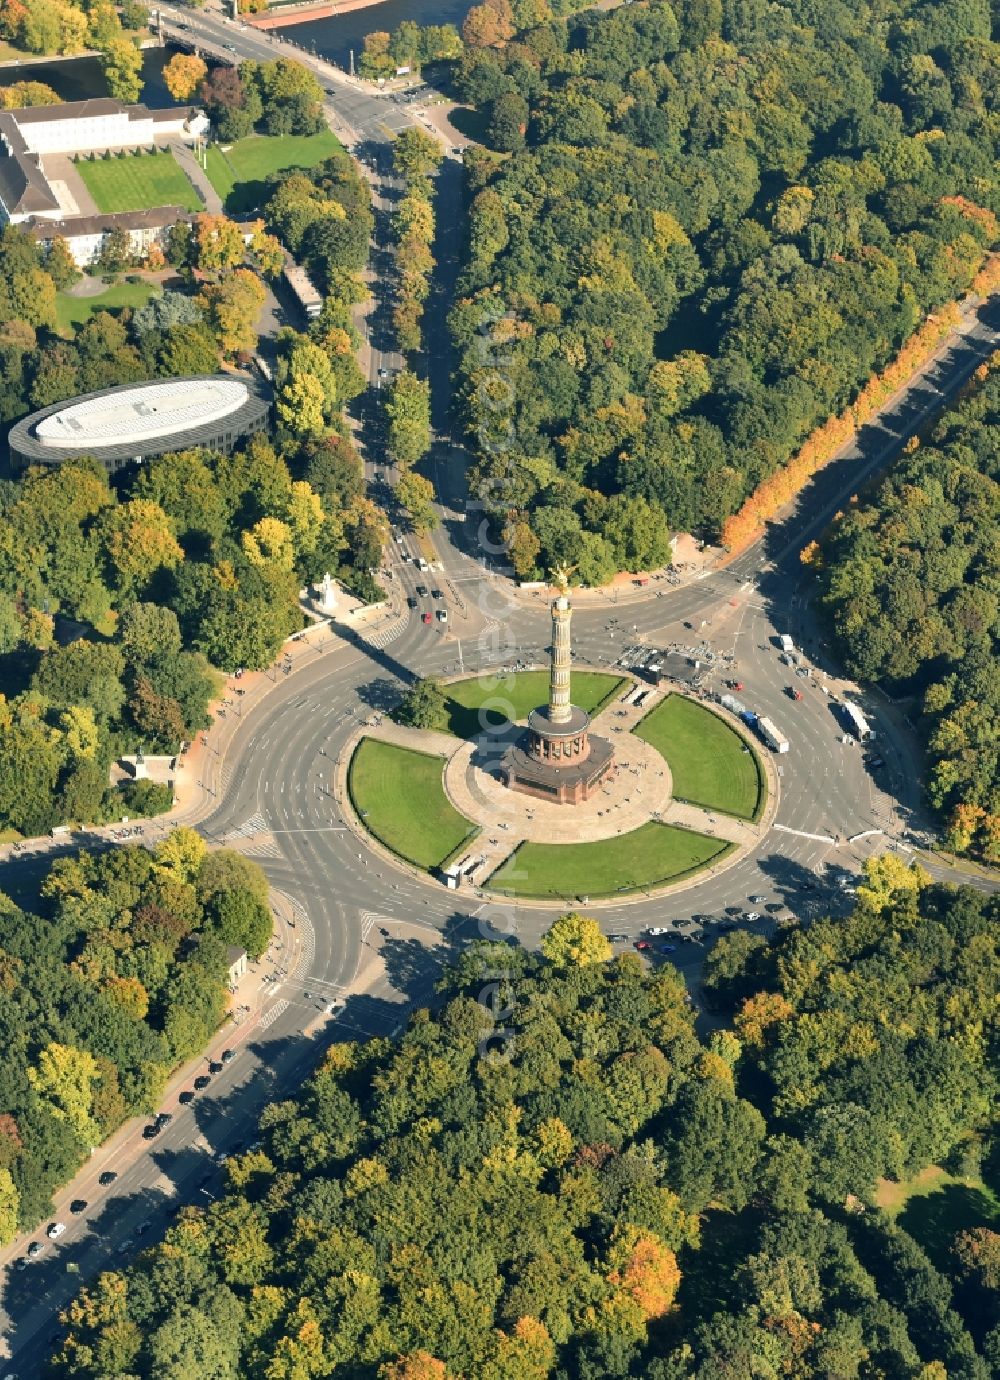 Aerial photograph Berlin - Traffic management of the roundabout road at the Victory Column - Big Star in the park area of the Tiergarten in Berlin in Germany